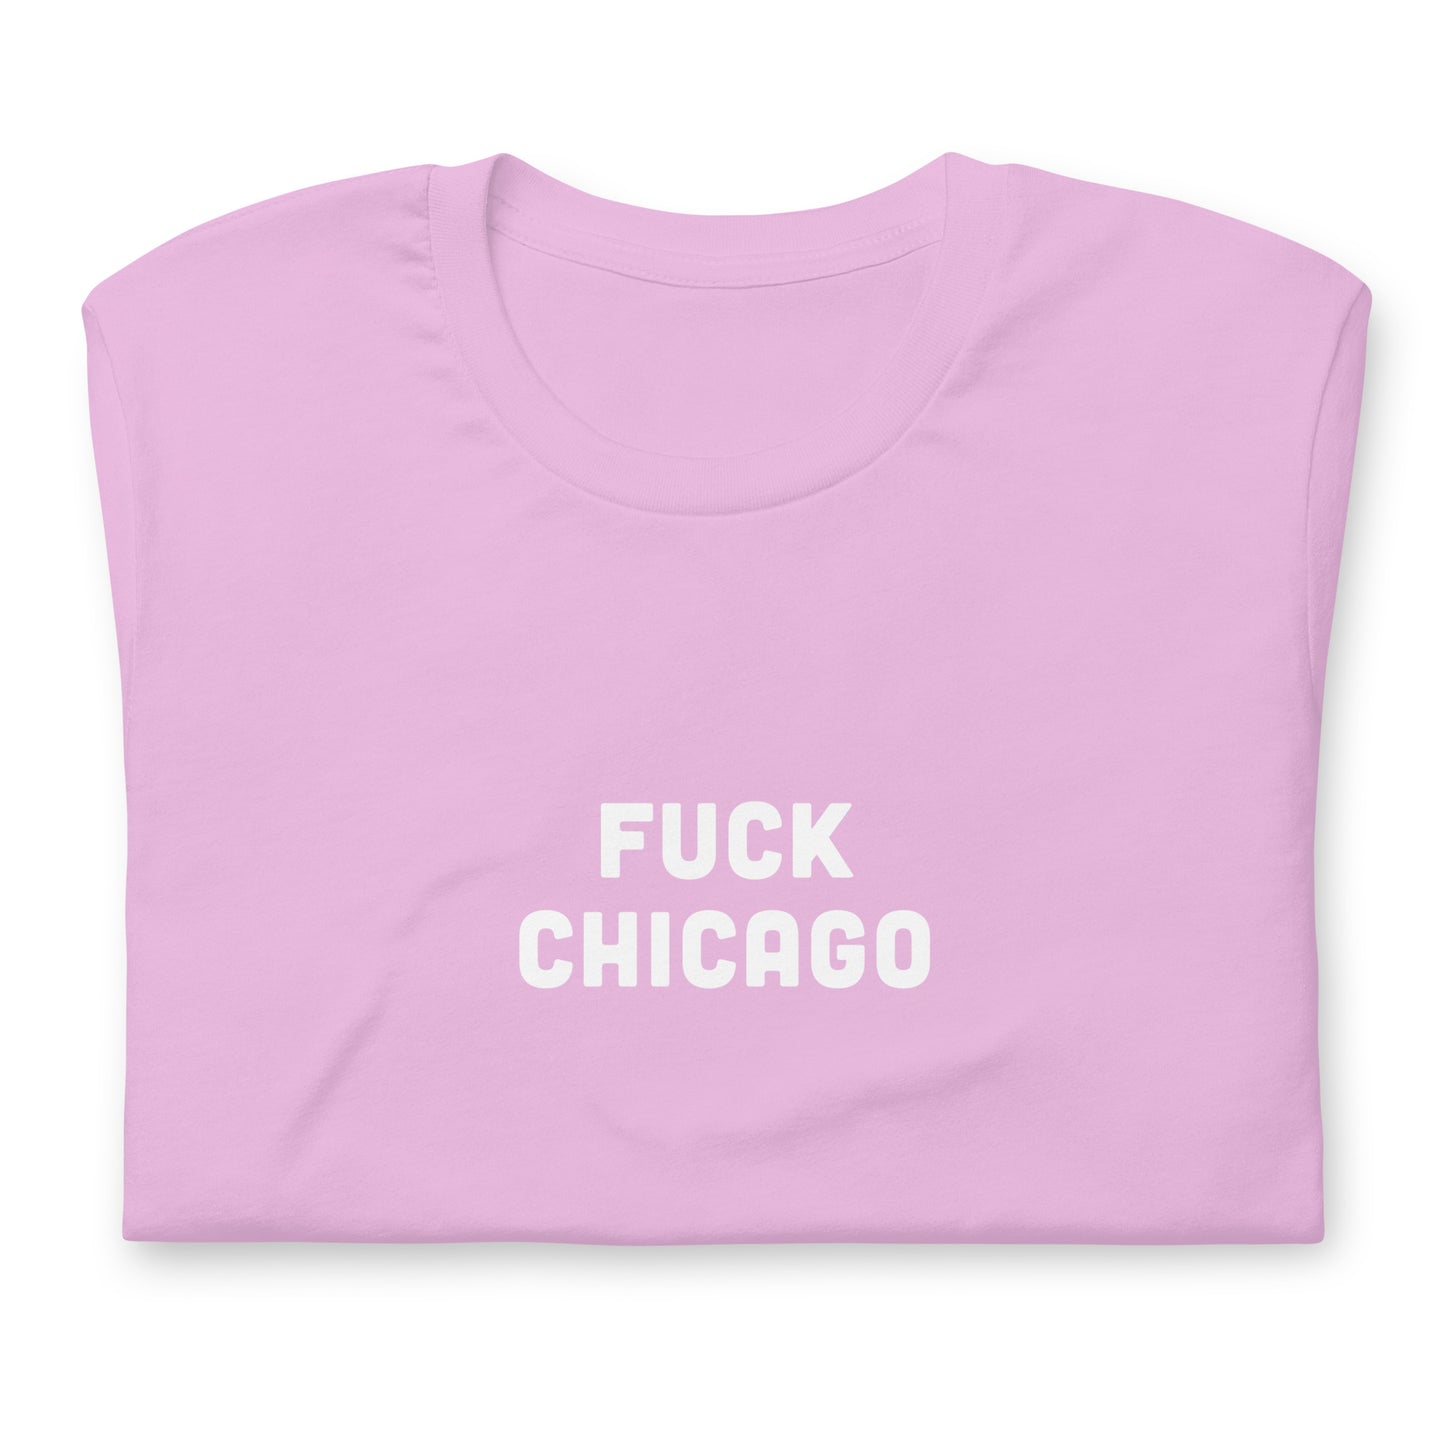 Fuck Chicago T-Shirt Size M Color Navy